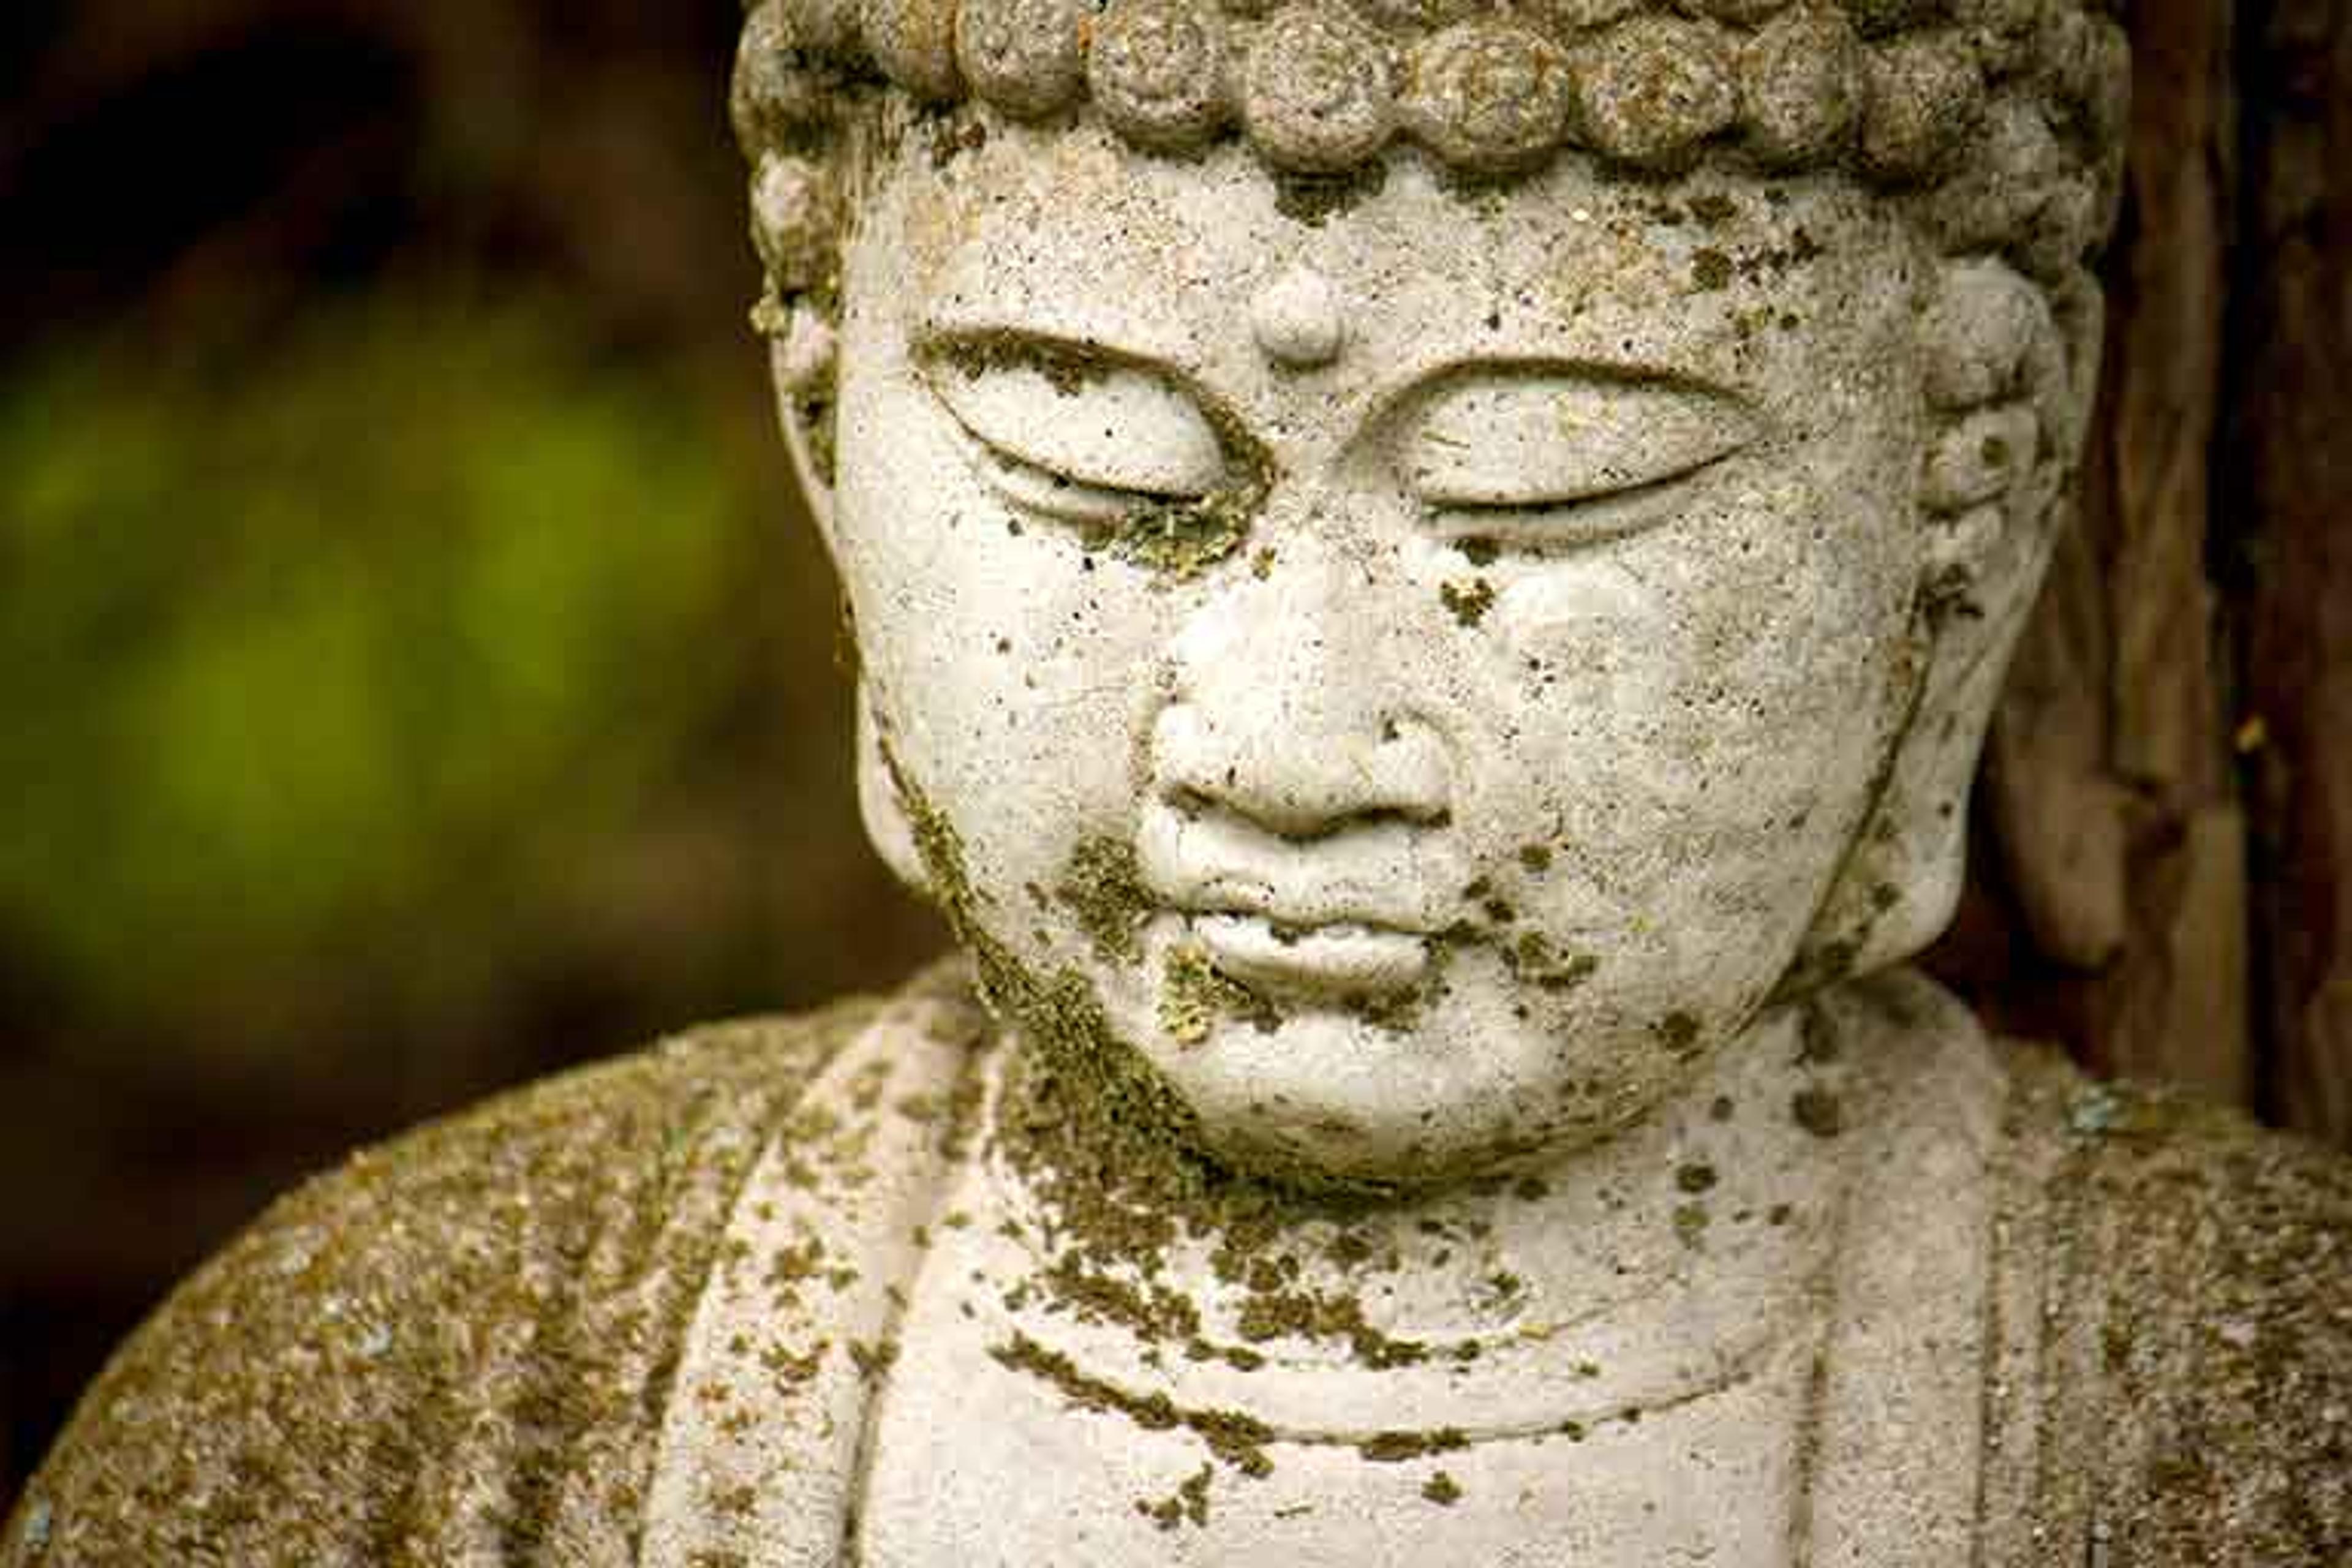 Buddhist meditation retreats at Karme Choling in Vermont